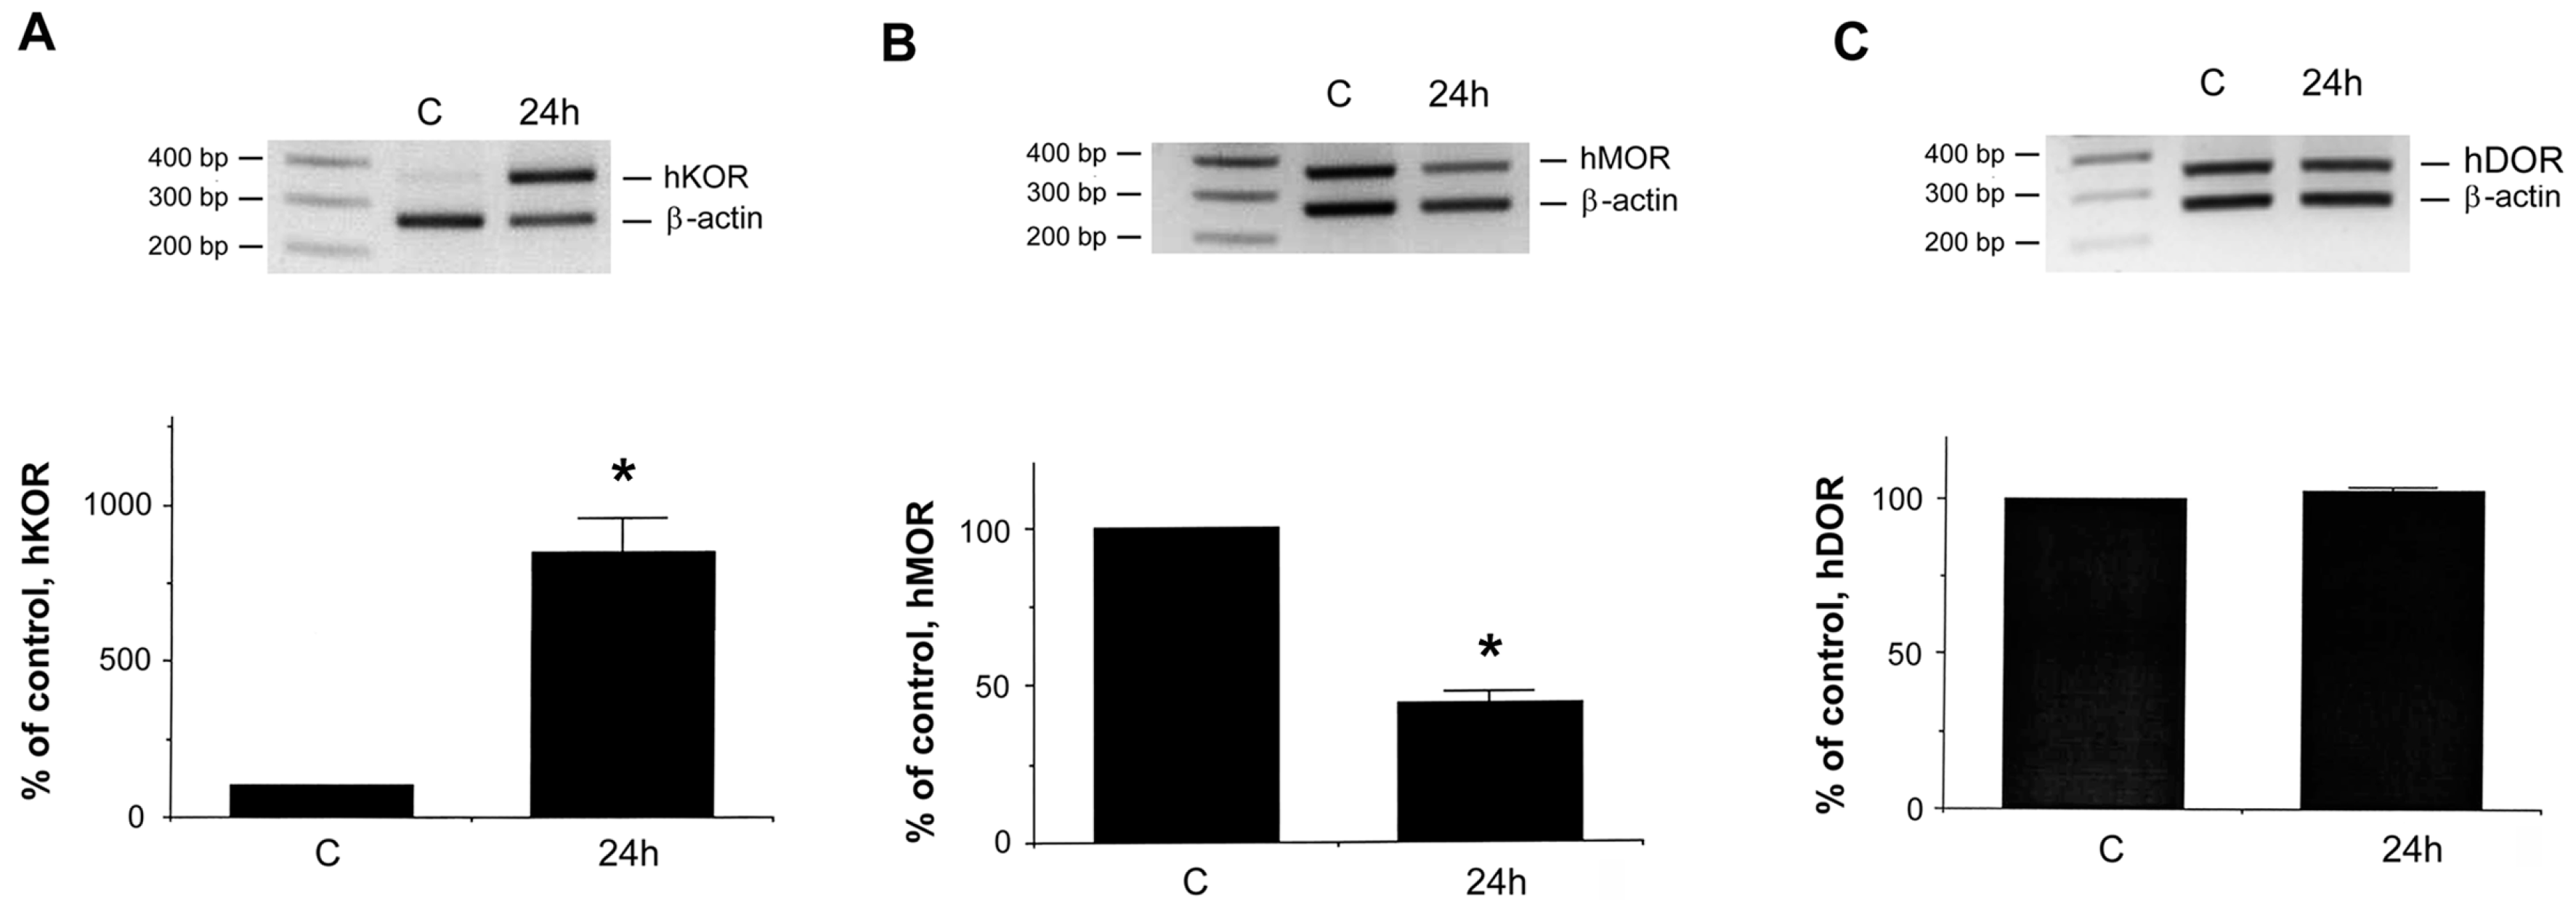 IJMS | Free Full-Text | Mechanism Governing Human Kappa-Opioid Receptor  Expression under Desferrioxamine-Induced Hypoxic Mimic Condition in  Neuronal NMB Cells